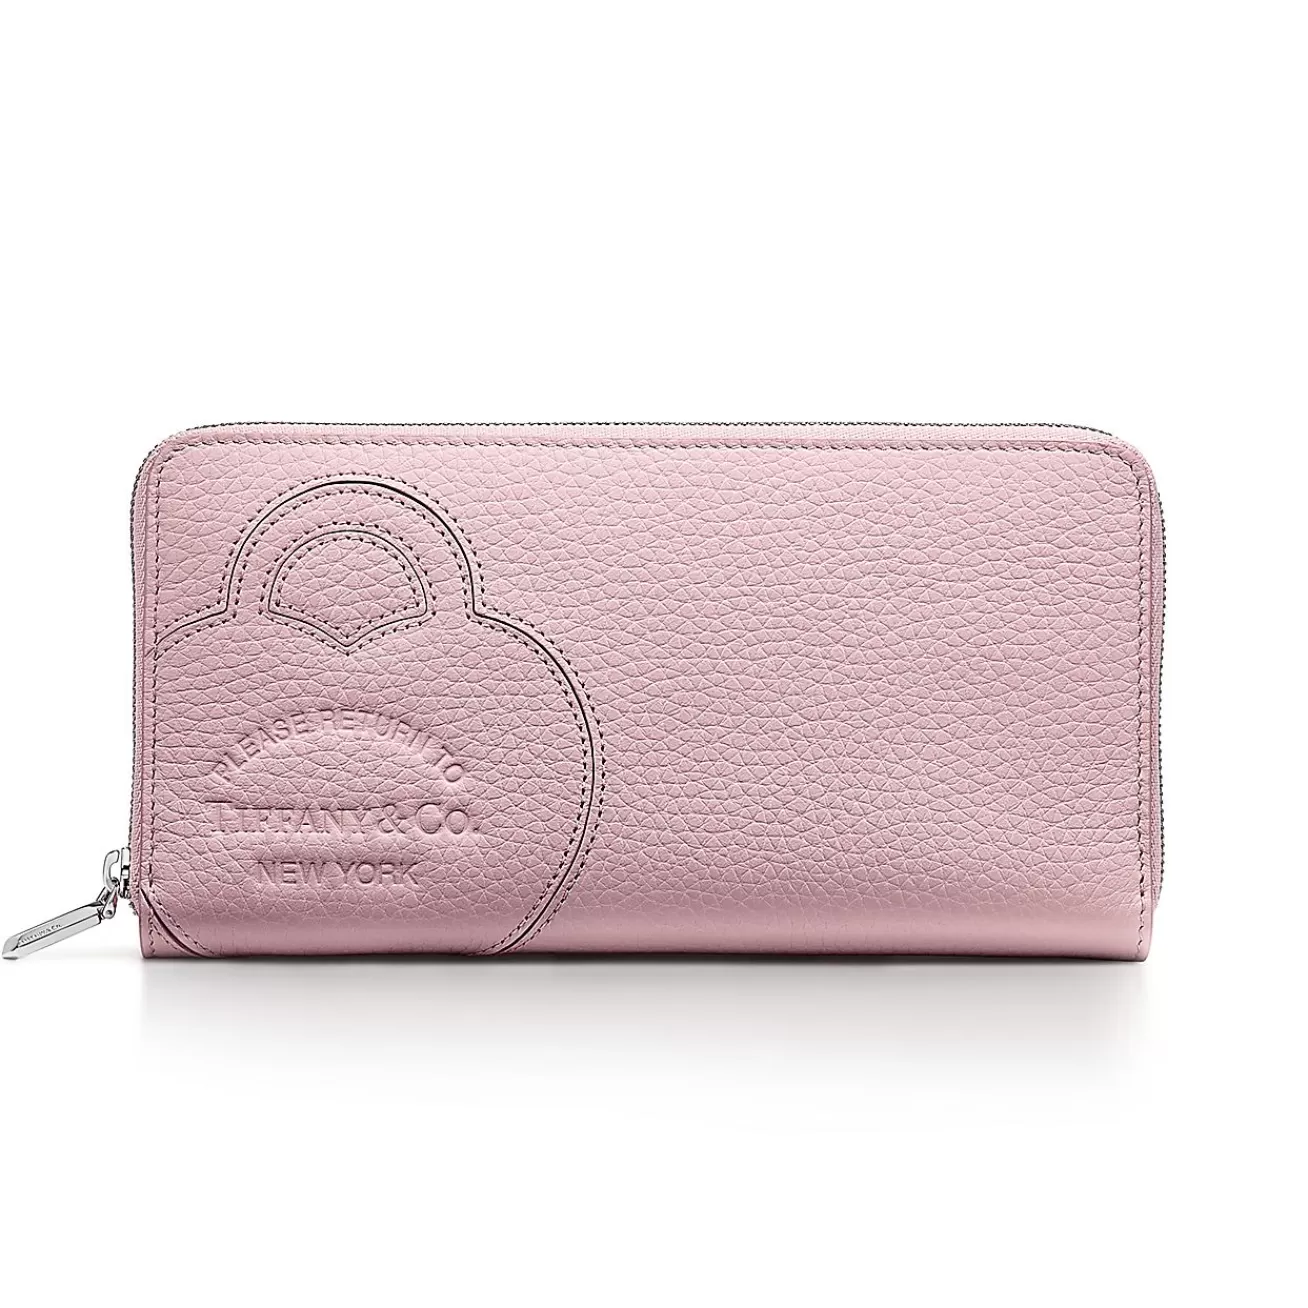 Tiffany & Co. Return to Tiffany® Large Zip Wallet in Crystal Pink Leather | ^Women Small Leather Goods | Women's Accessories